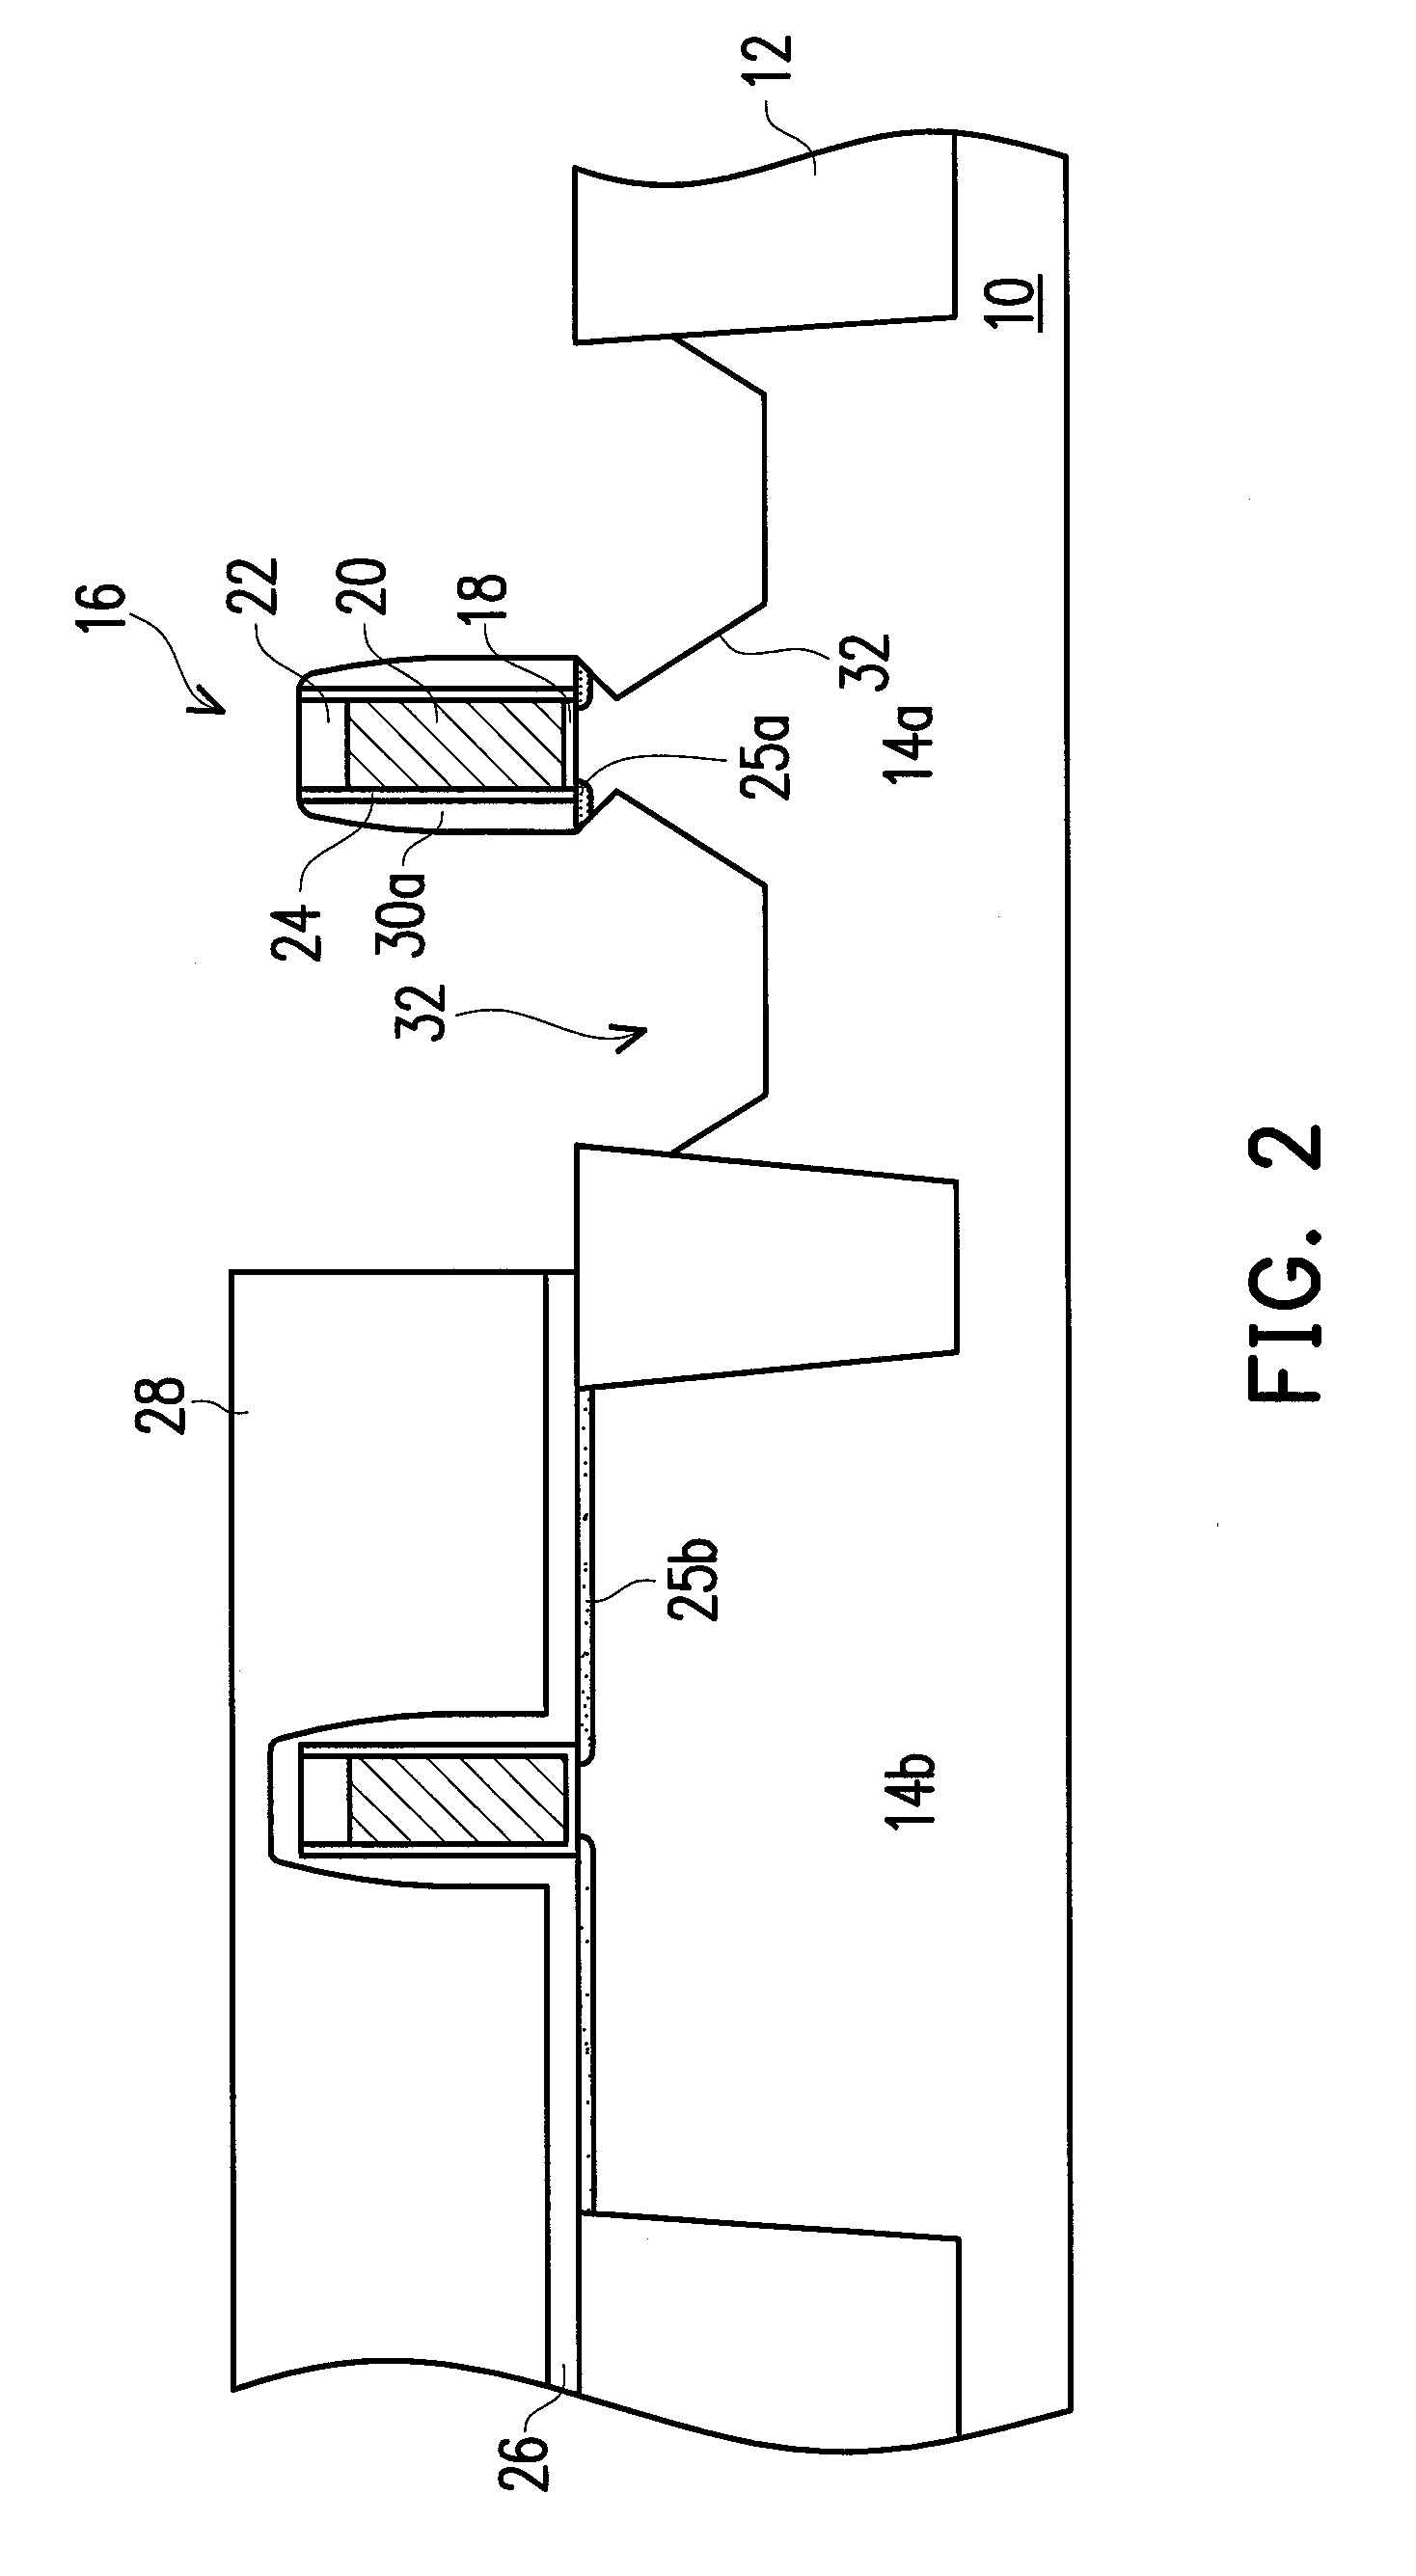 Method for fabricating first and second epitaxial cap layers